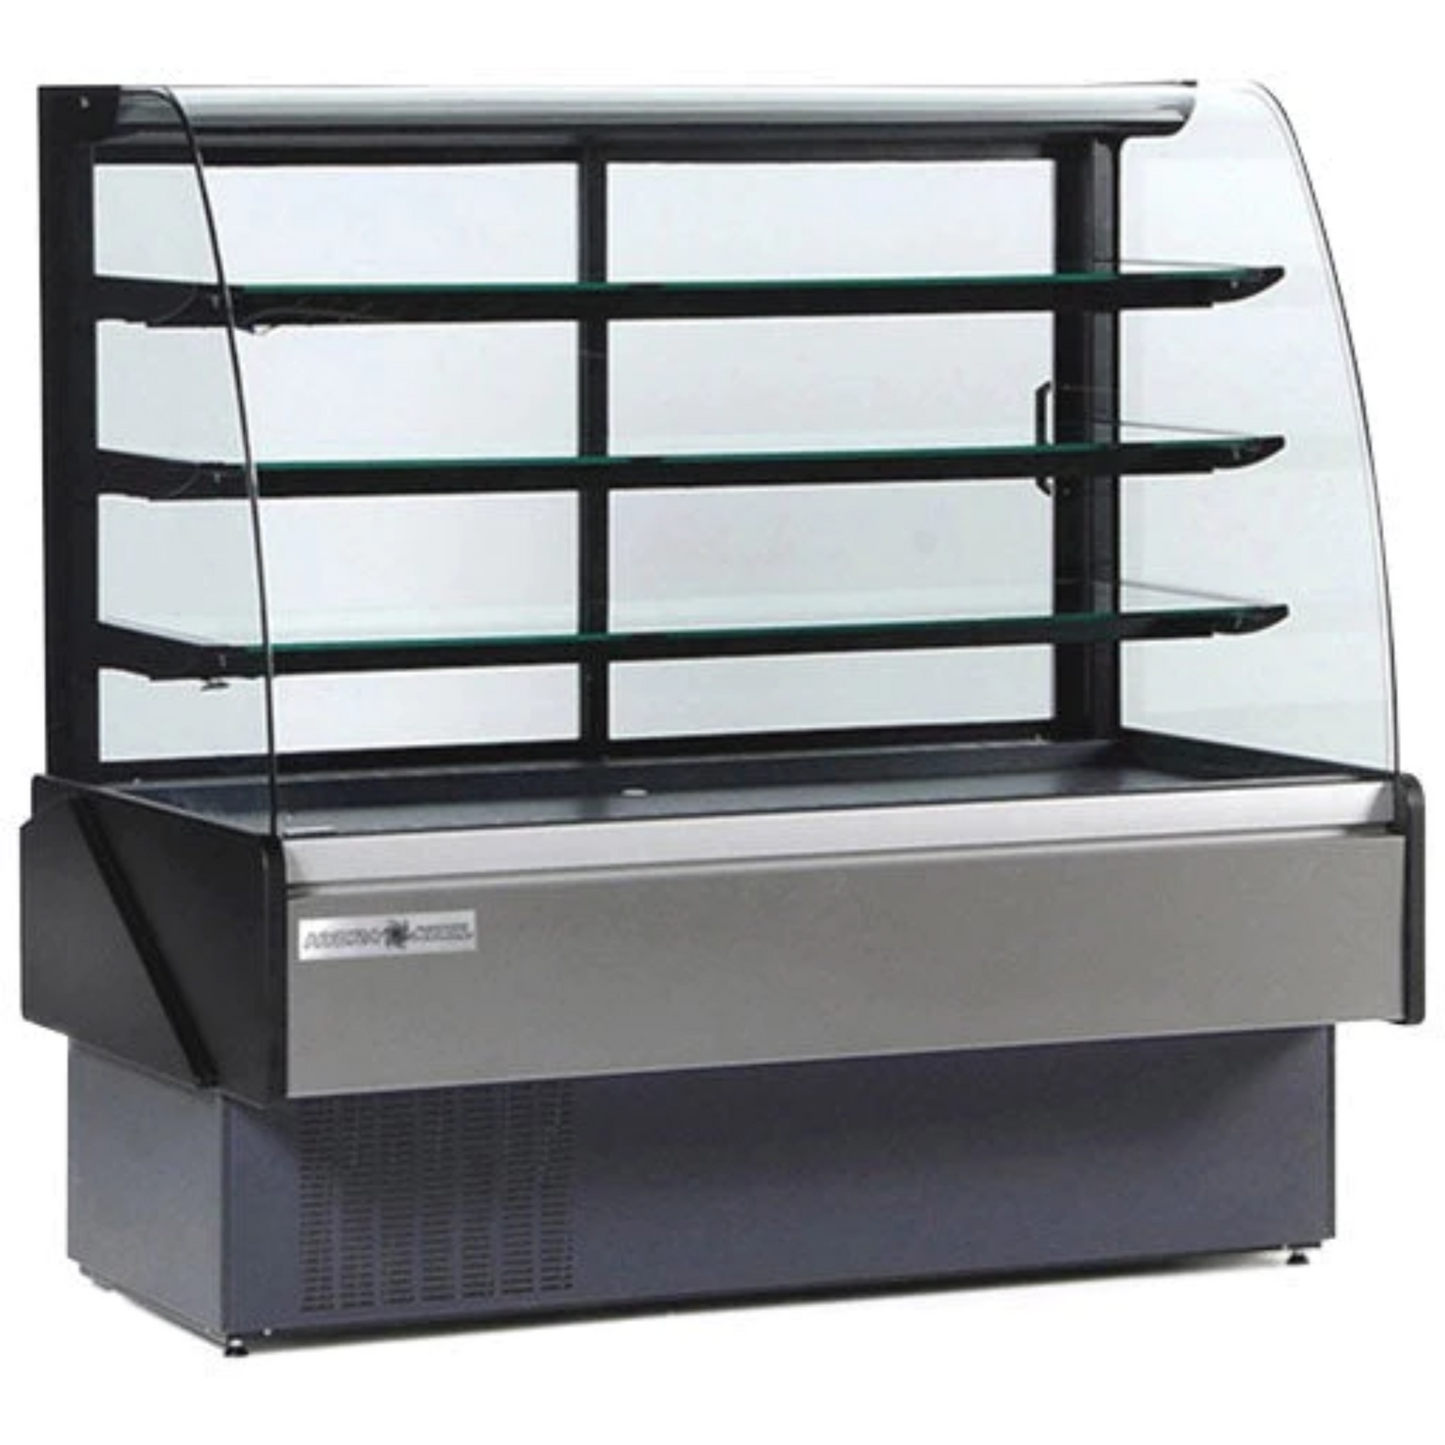 Hydra-Kool KBD-CG-60-S 60" Curved Glass Bakery Deli Case Self-Contained